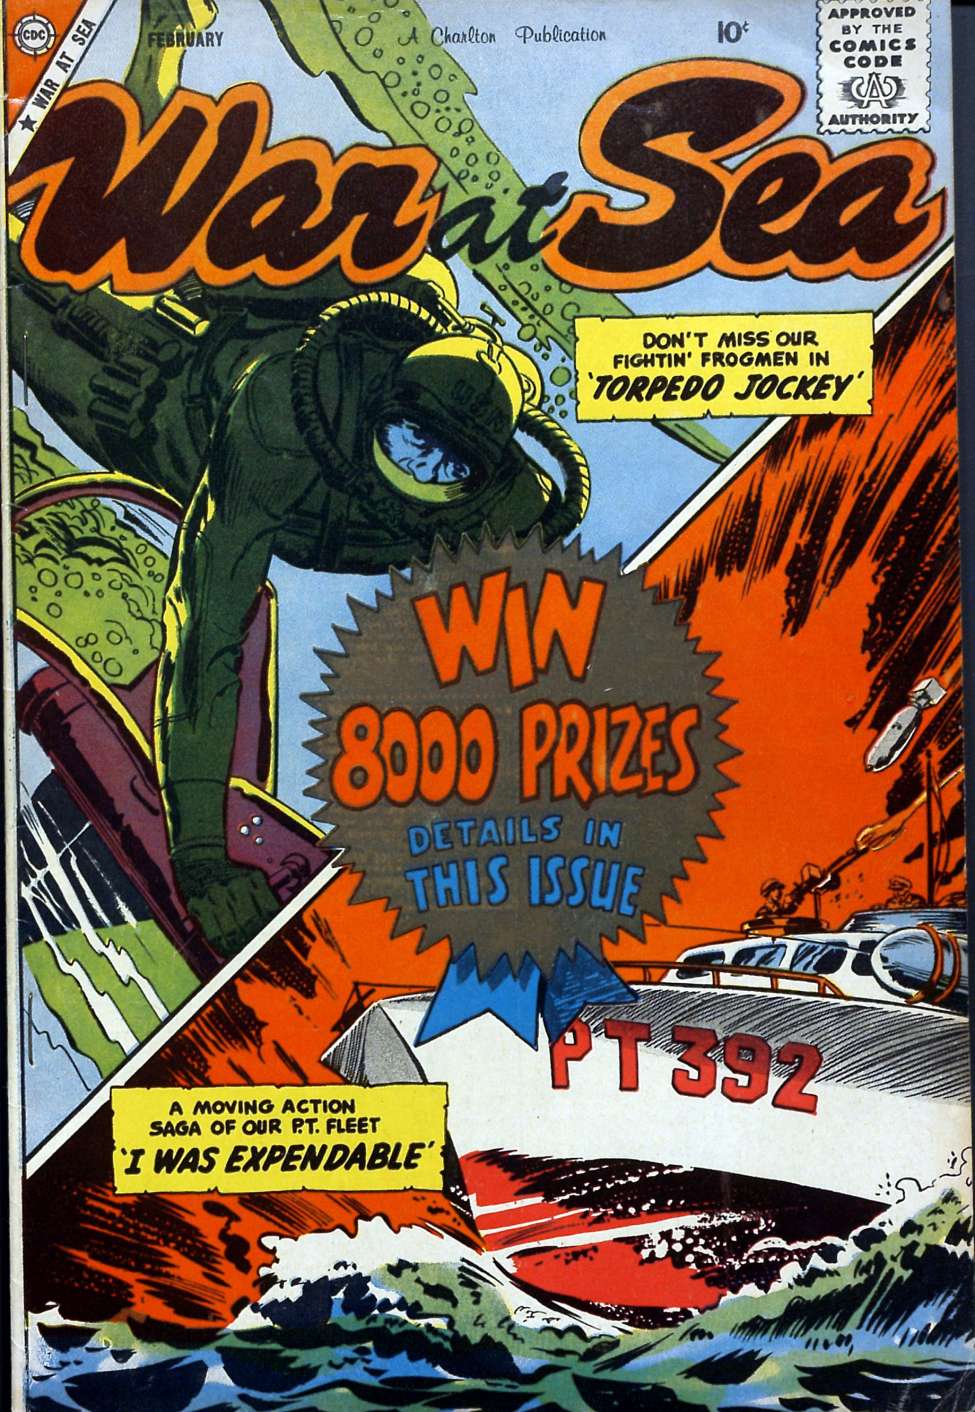 Comic Book Cover For War at Sea 29